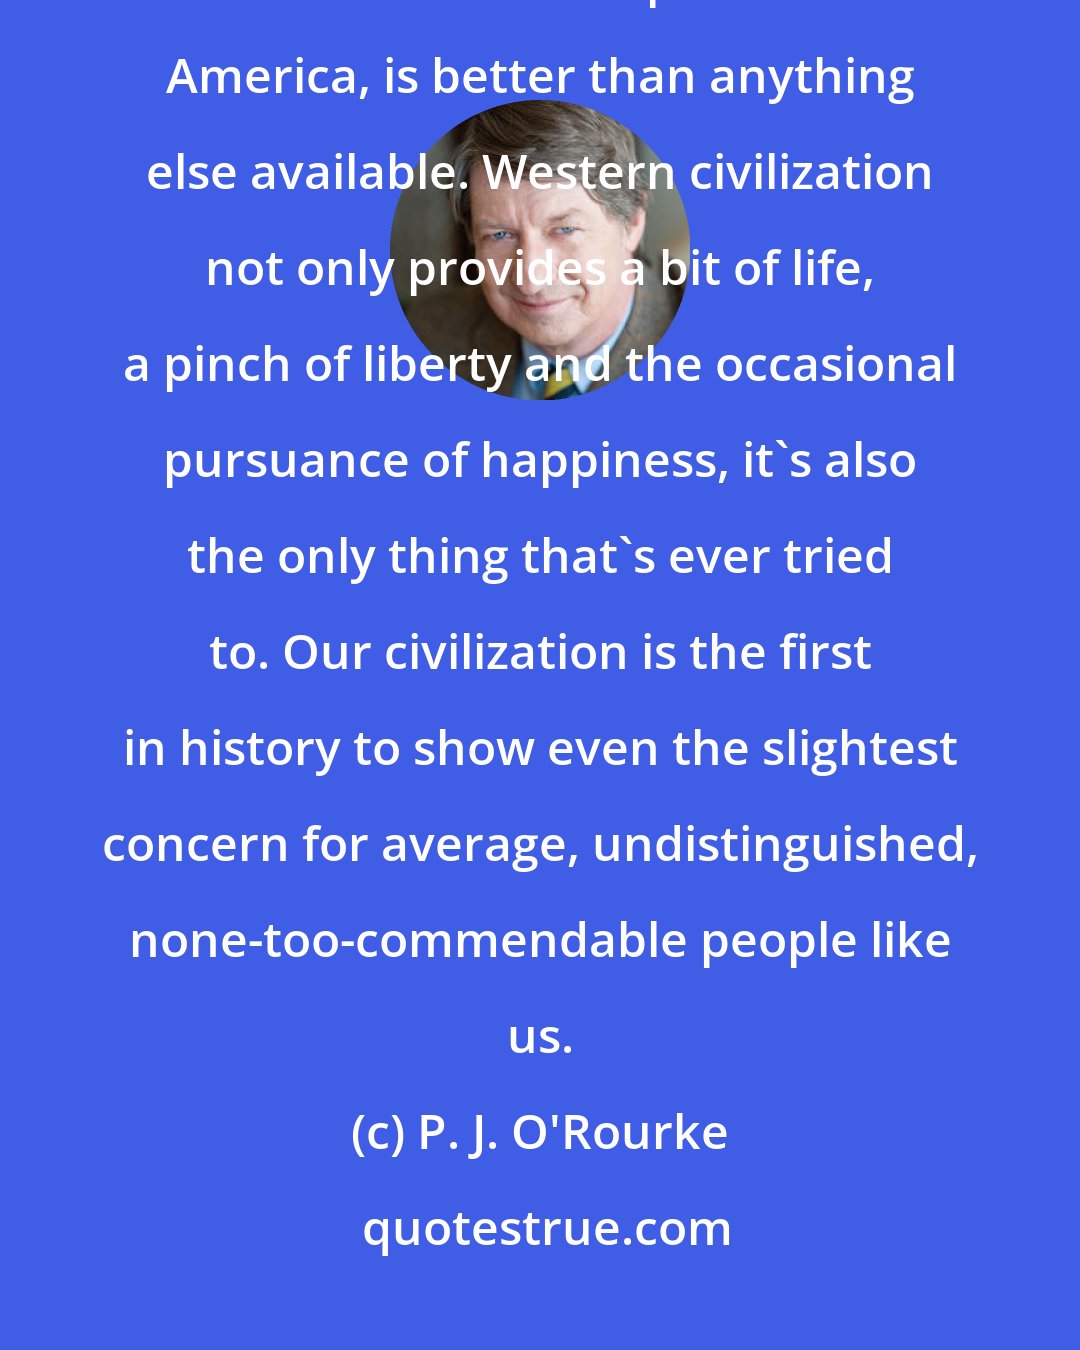 P. J. O'Rourke: So-called Western Civilization, as practised in half of Europe, some of Asia and a few parts of North America, is better than anything else available. Western civilization not only provides a bit of life, a pinch of liberty and the occasional pursuance of happiness, it's also the only thing that's ever tried to. Our civilization is the first in history to show even the slightest concern for average, undistinguished, none-too-commendable people like us.